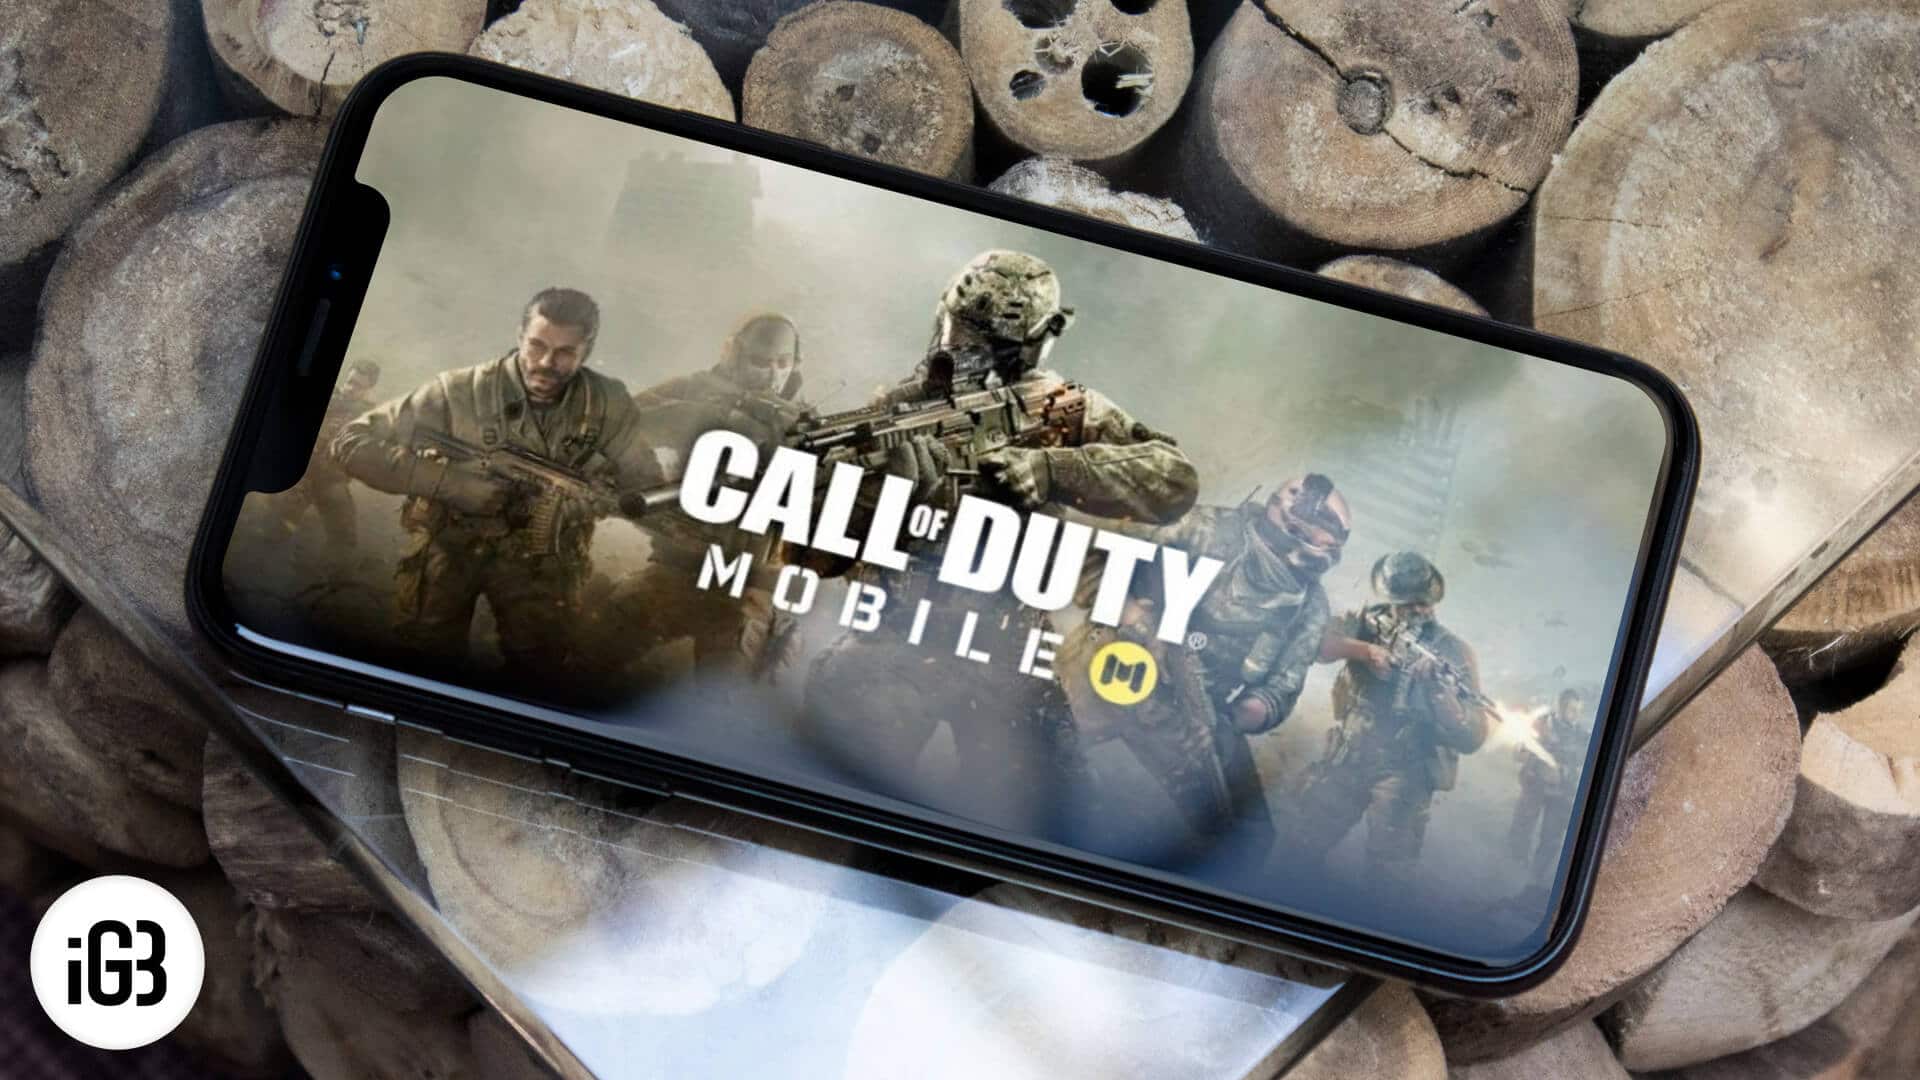 How to download call of duty mobile on iphone or ipad